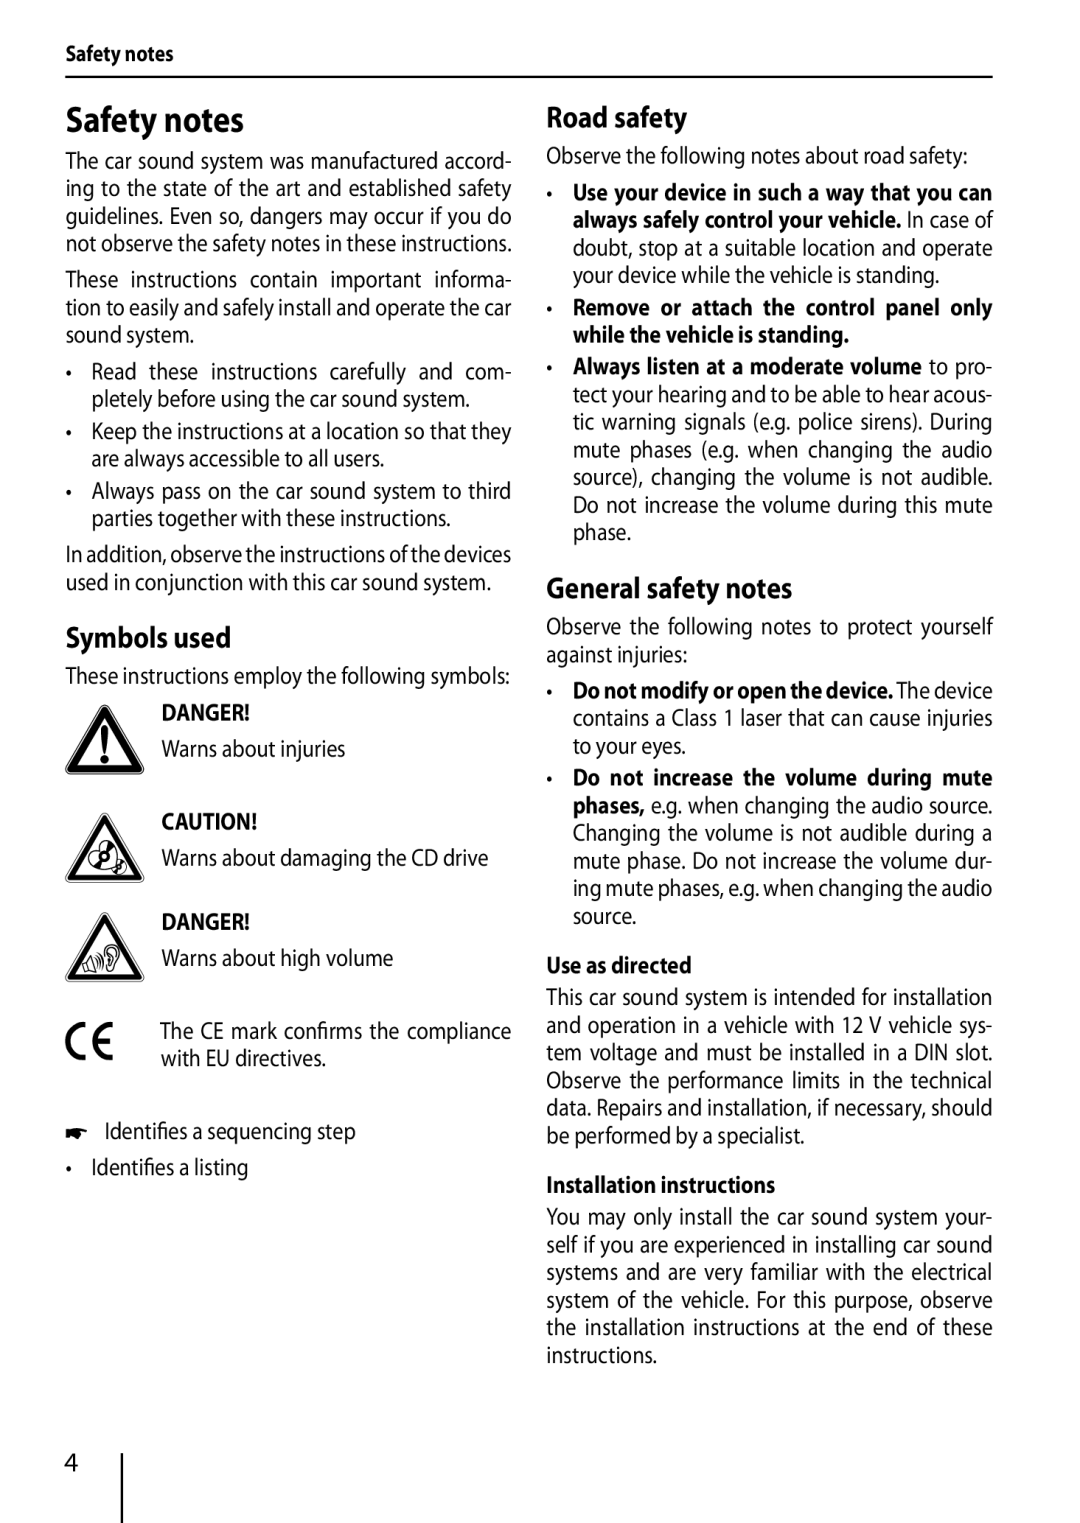 Blaupunkt 420 BT, 320 Safety notes, Symbols used, Road safety, General safety notes, Danger, Use as directed 